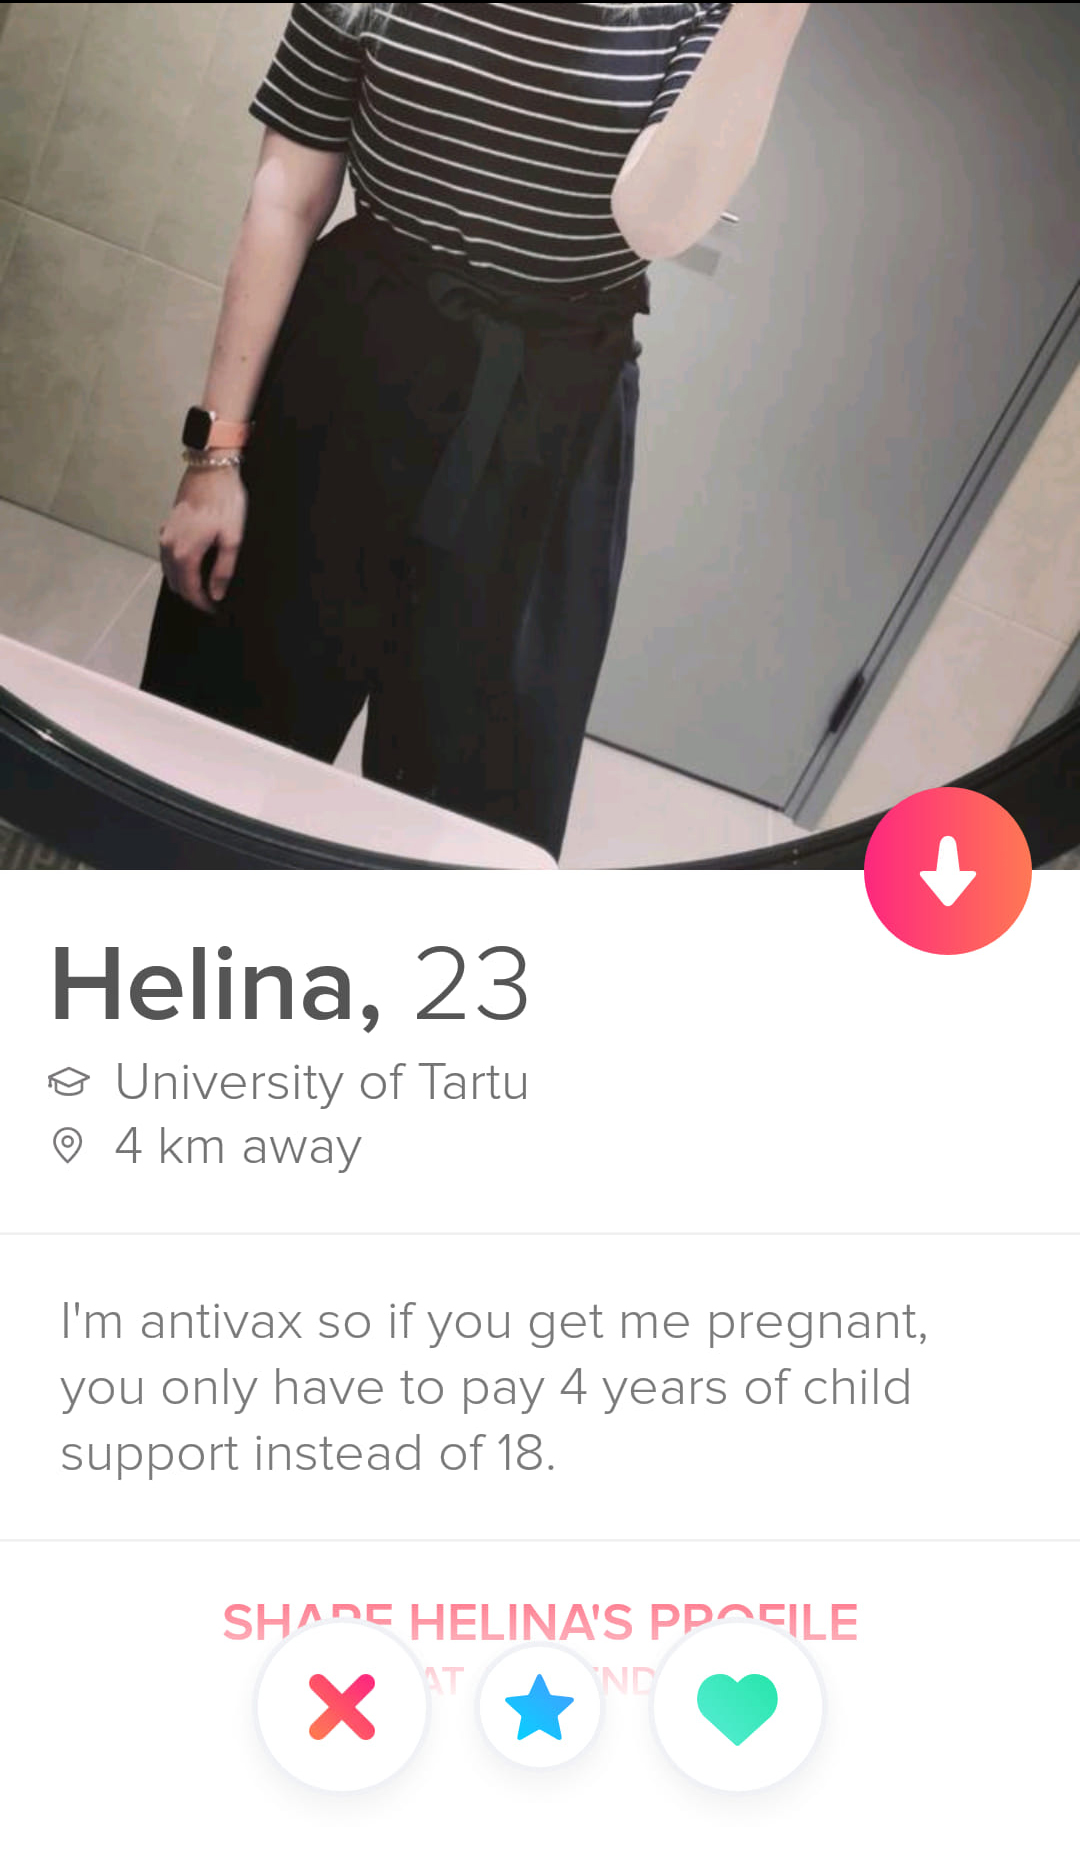 shoulder - Helina, 23 e University of Tartu 4 km away I'm antivax so if you get me pregnant, you only have to pay 4 years of child support instead of 18. Shade Helina'S Ppogle X